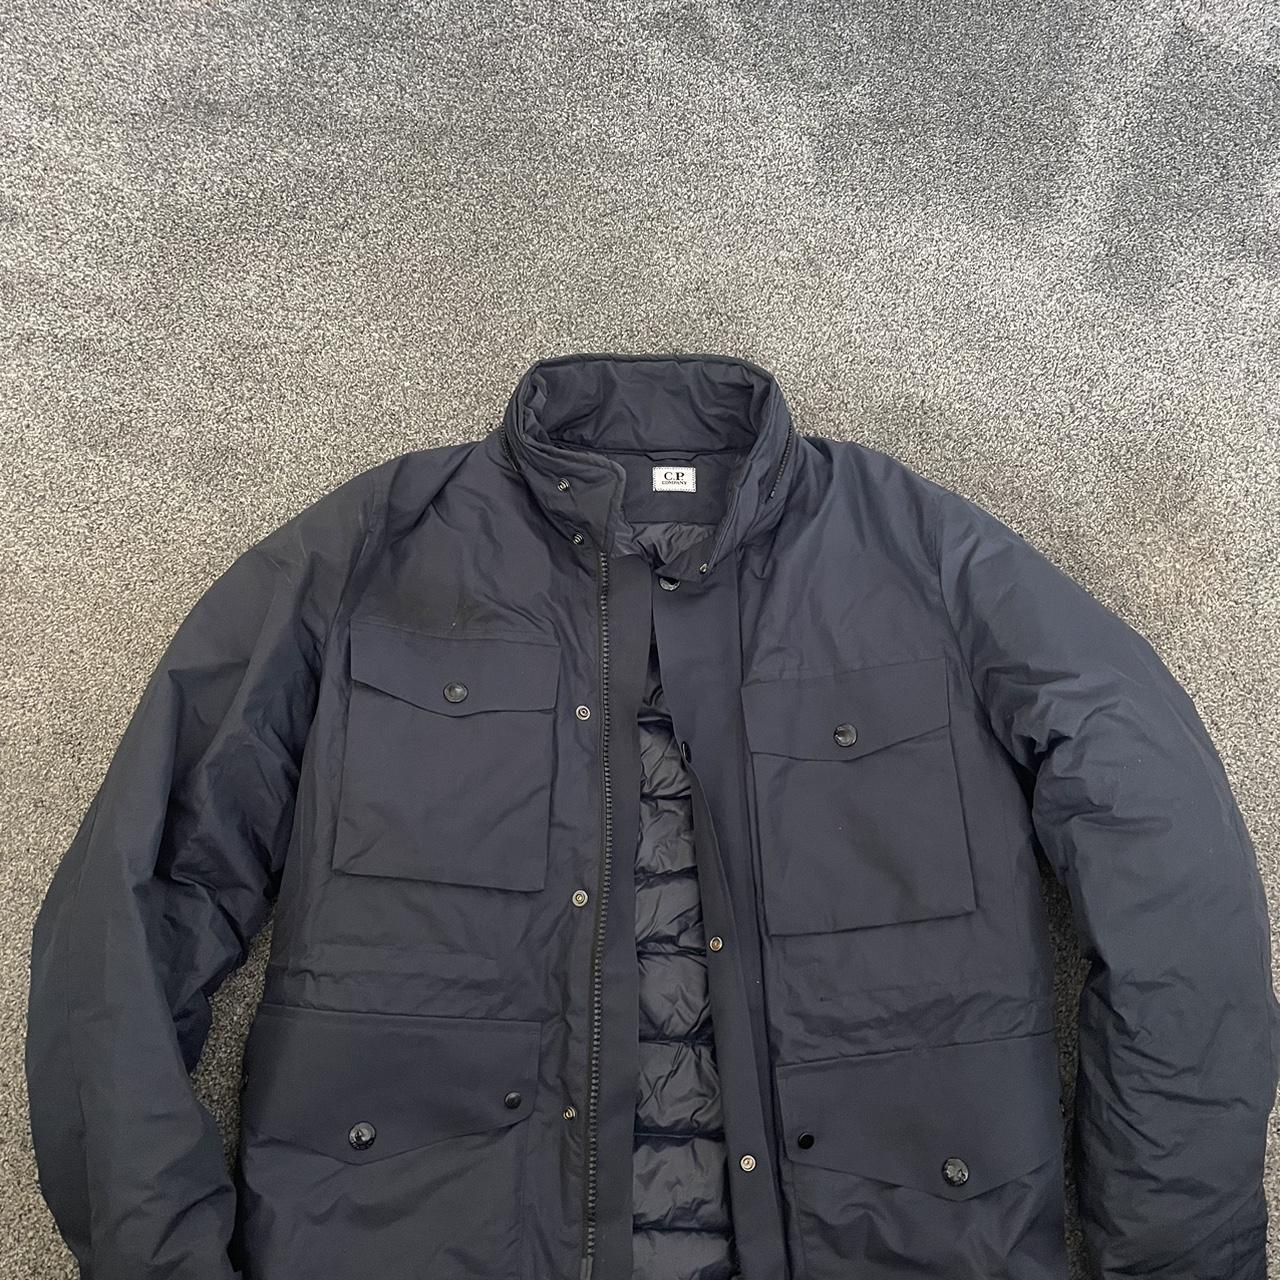 Mens Cp company overshirt Lookin for offers don’t... - Depop